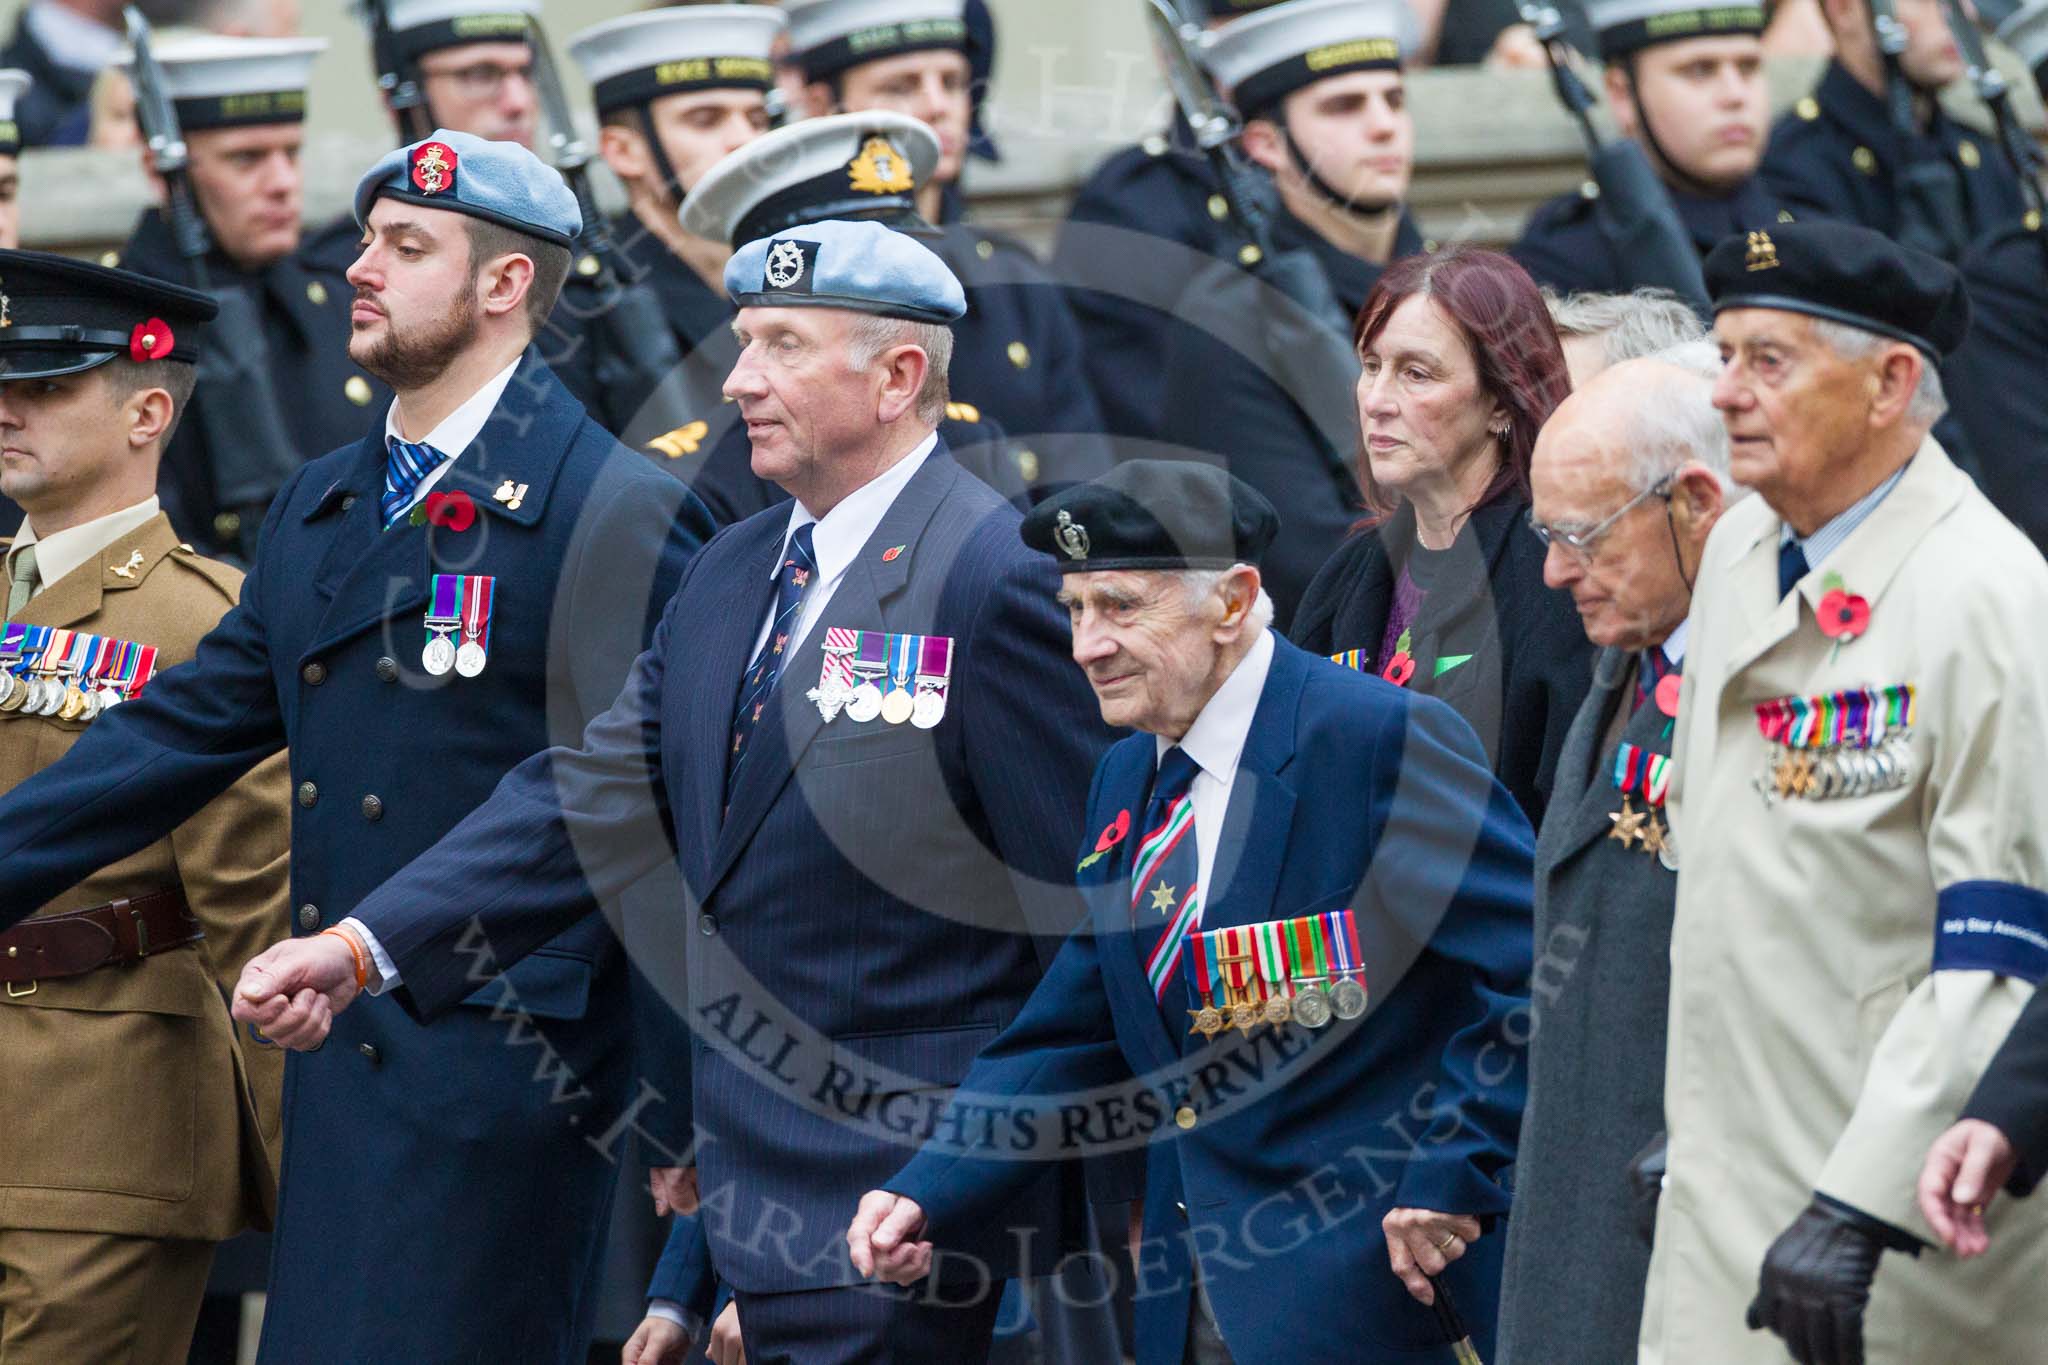 Remembrance Sunday at the Cenotaph 2015: Group F25, Italy Star Association 1943-1945.
Cenotaph, Whitehall, London SW1,
London,
Greater London,
United Kingdom,
on 08 November 2015 at 12:07, image #1135